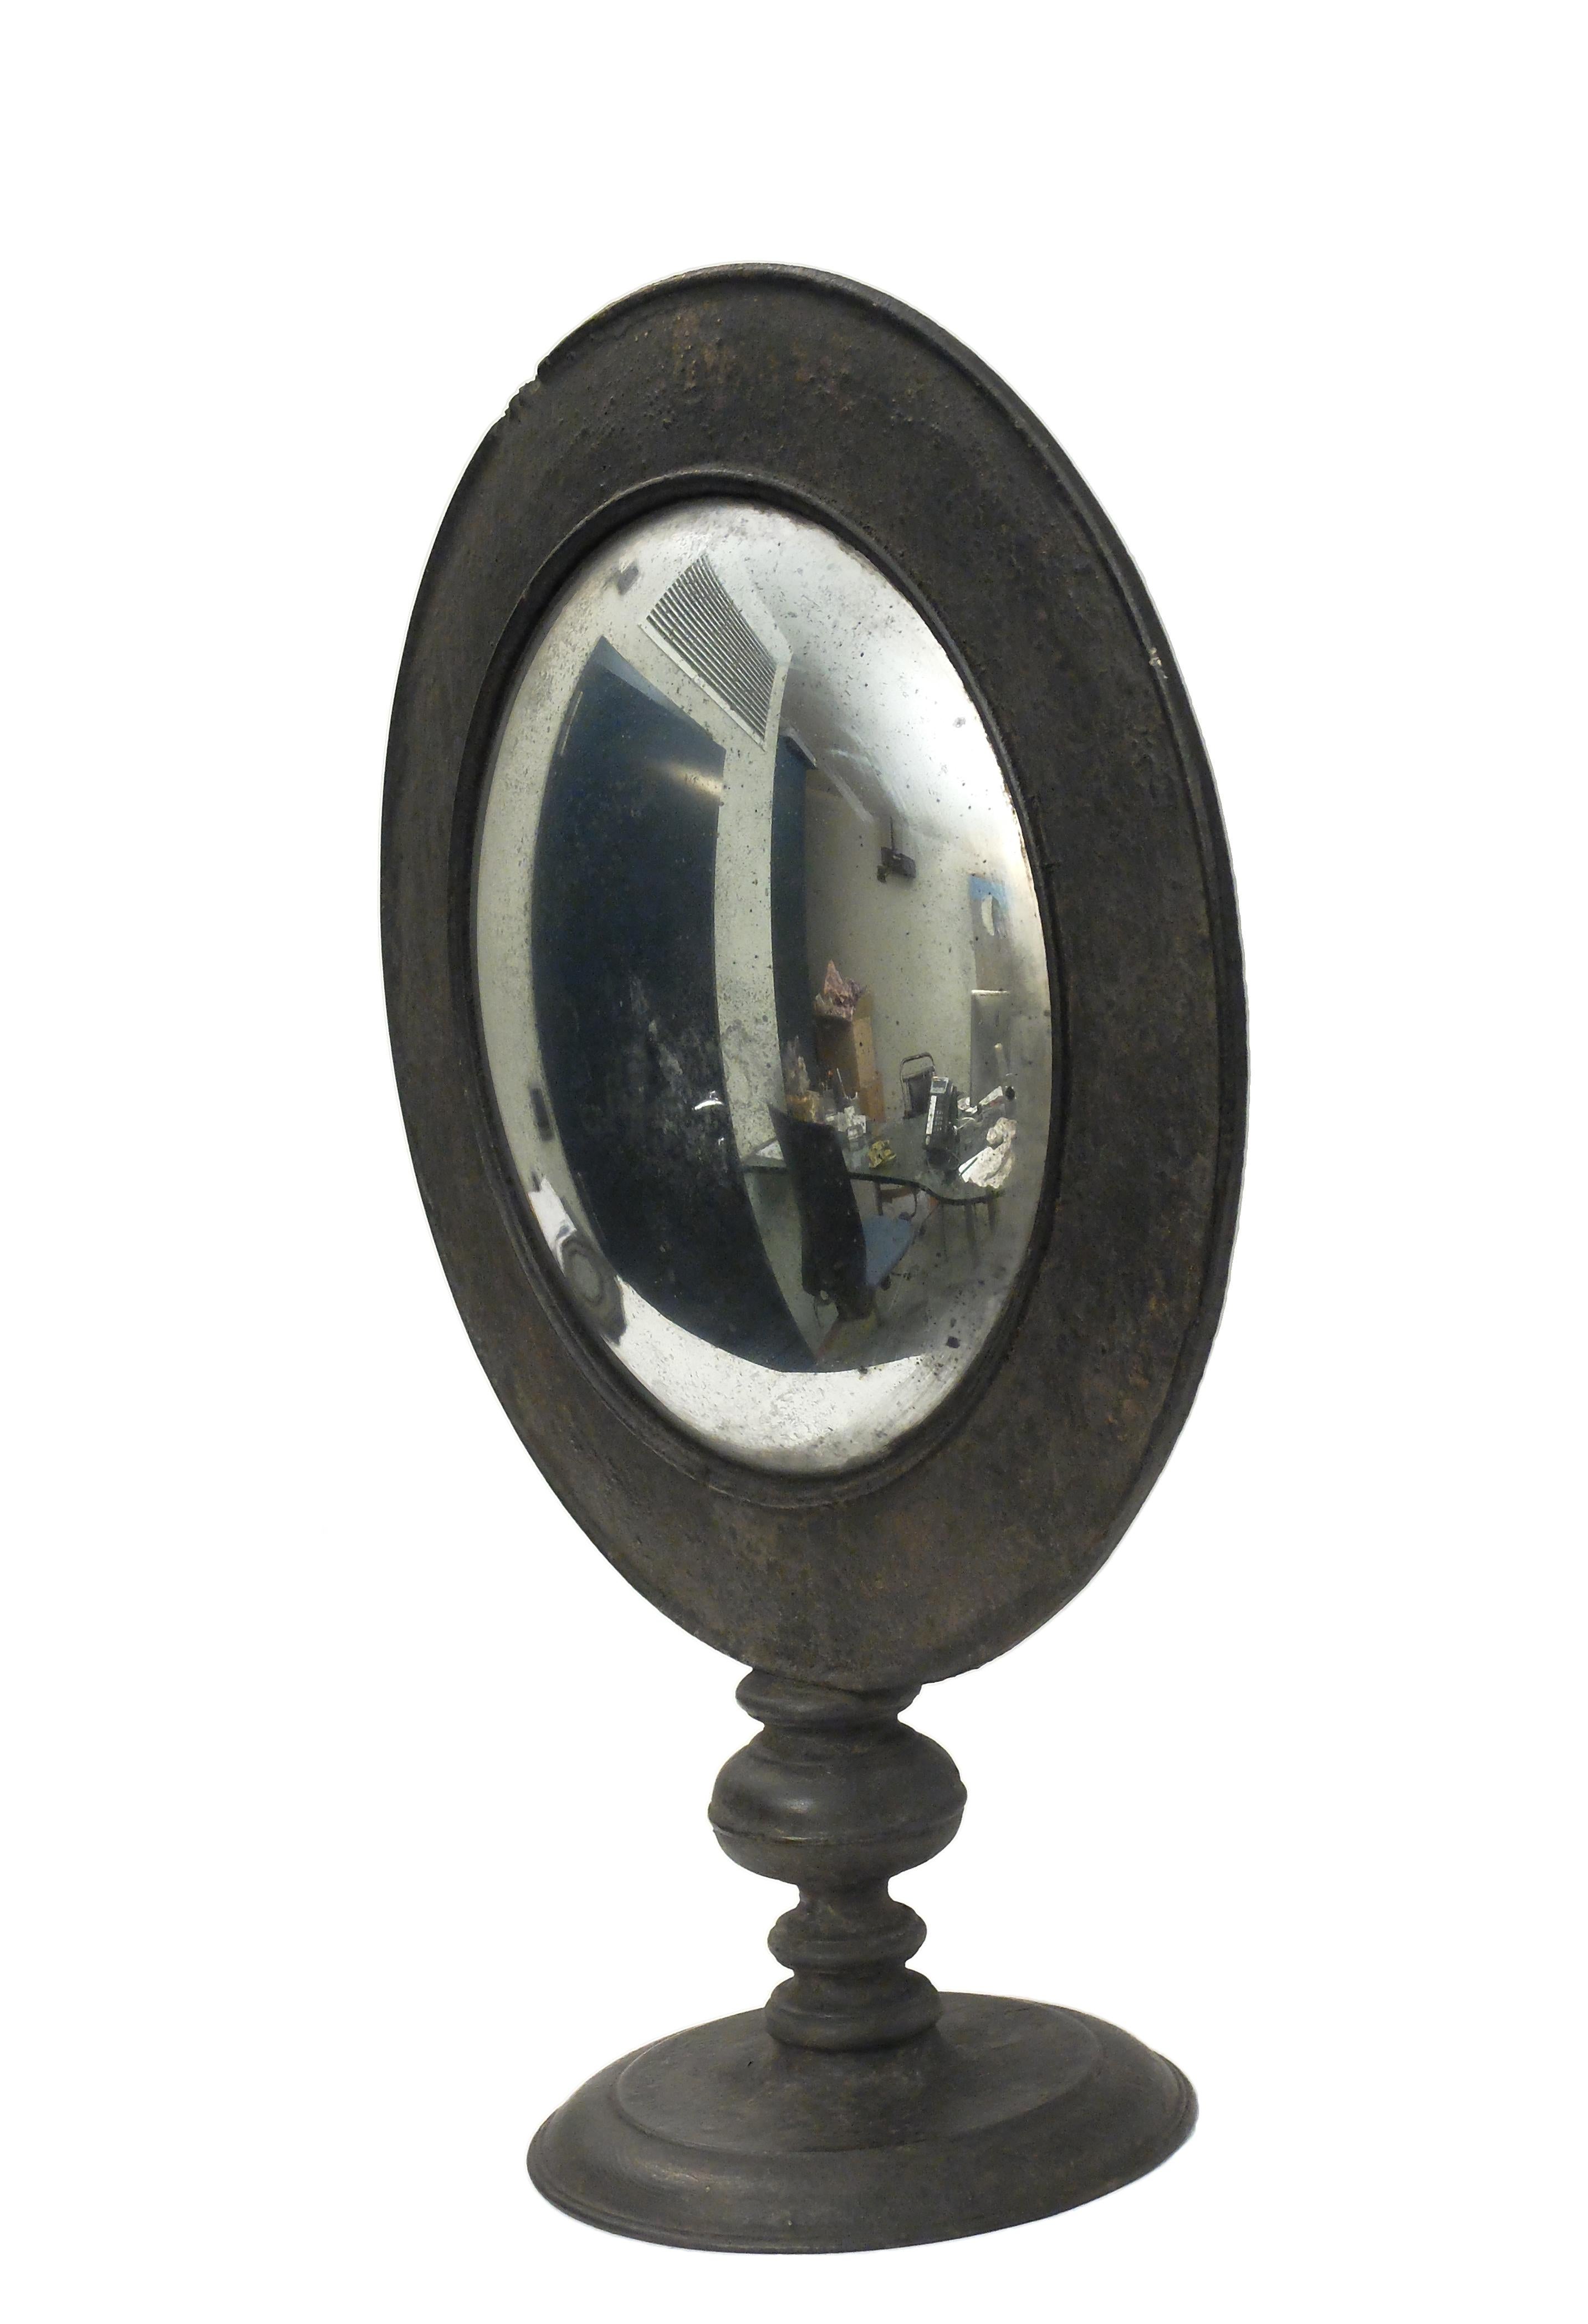 A large Wunderkammer convex round table mirror with black wooden frame, mounted over a black round wooden base.